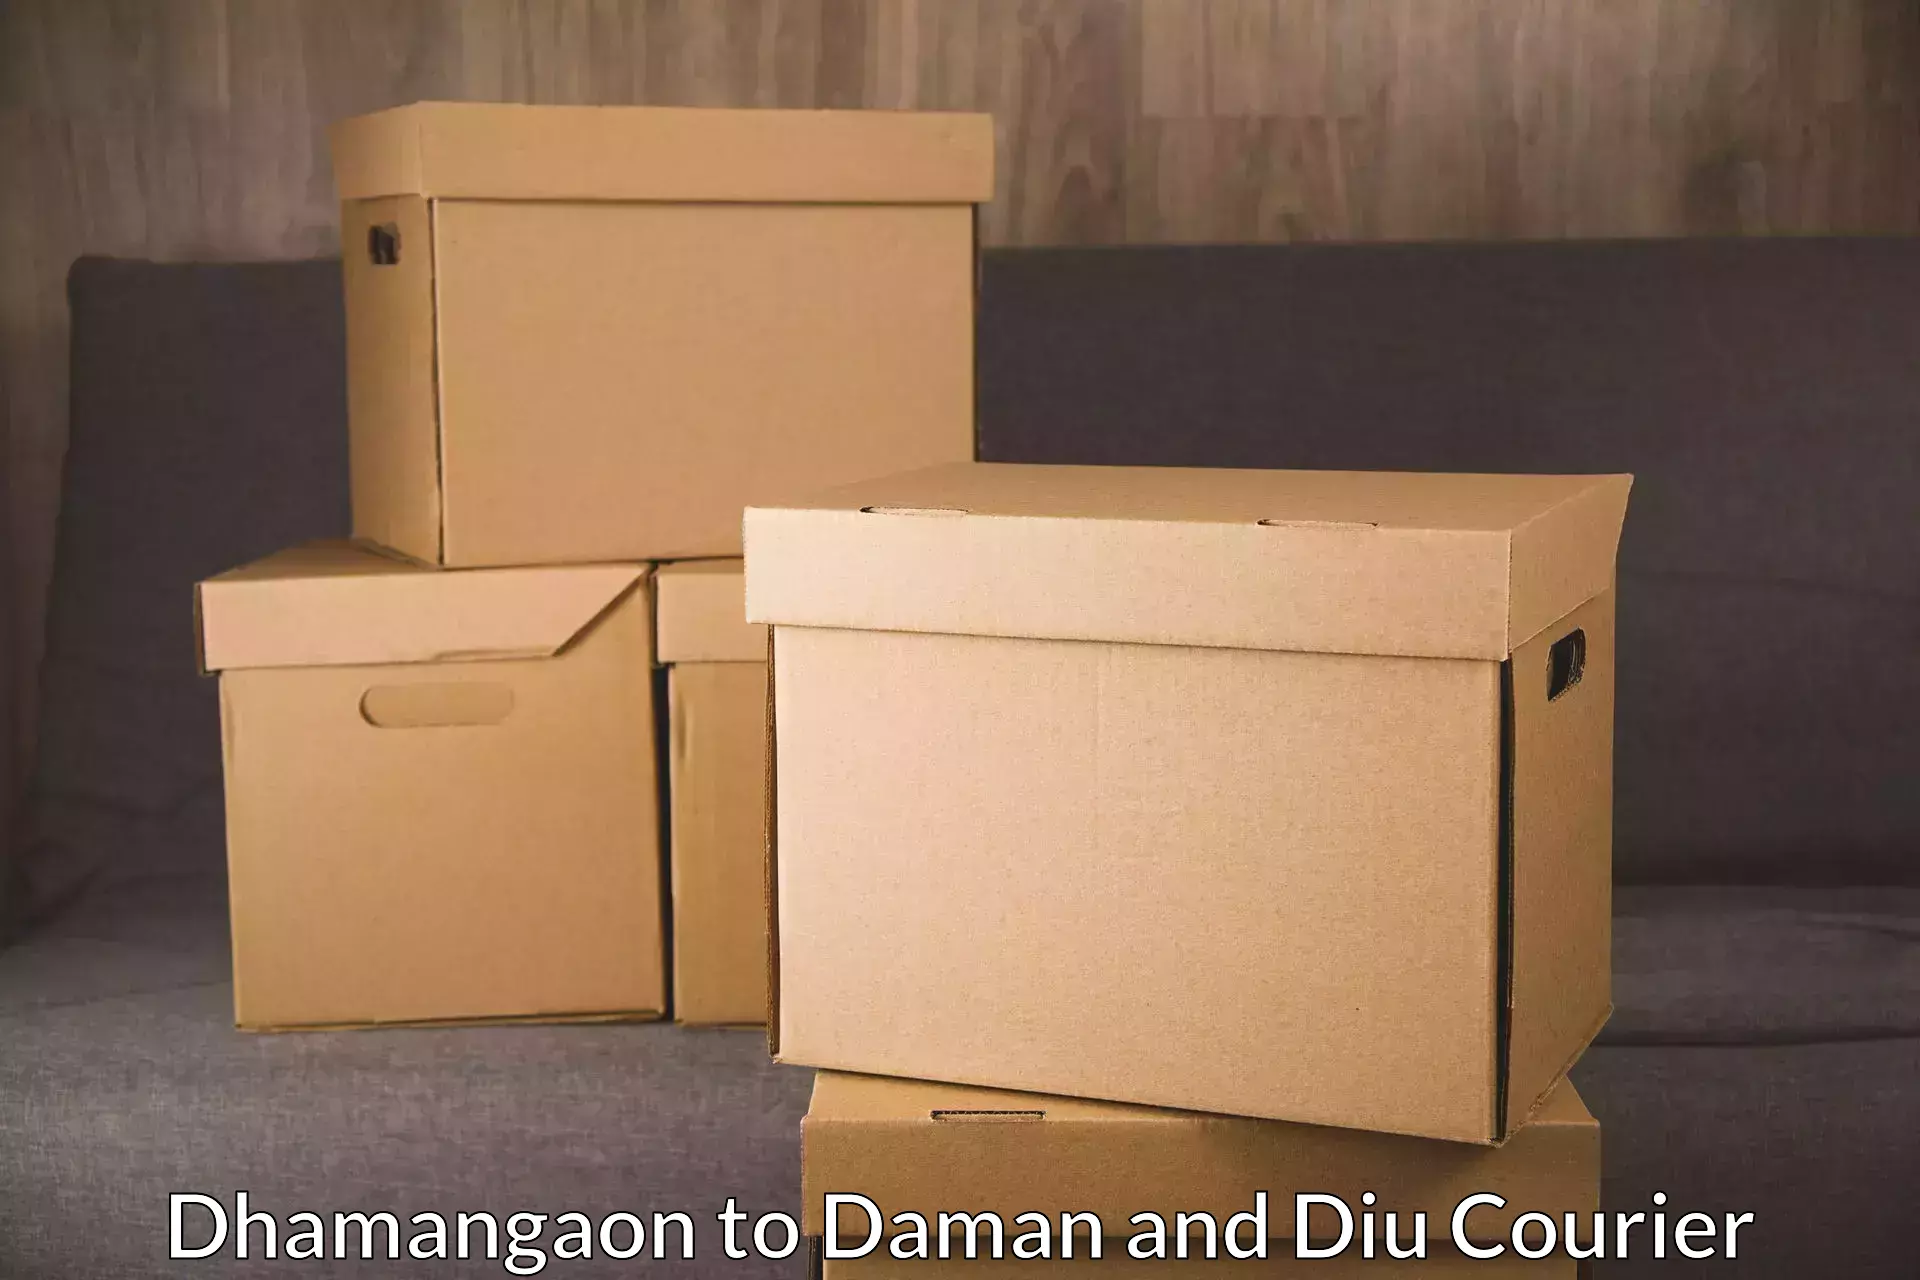 Courier service innovation Dhamangaon to Daman